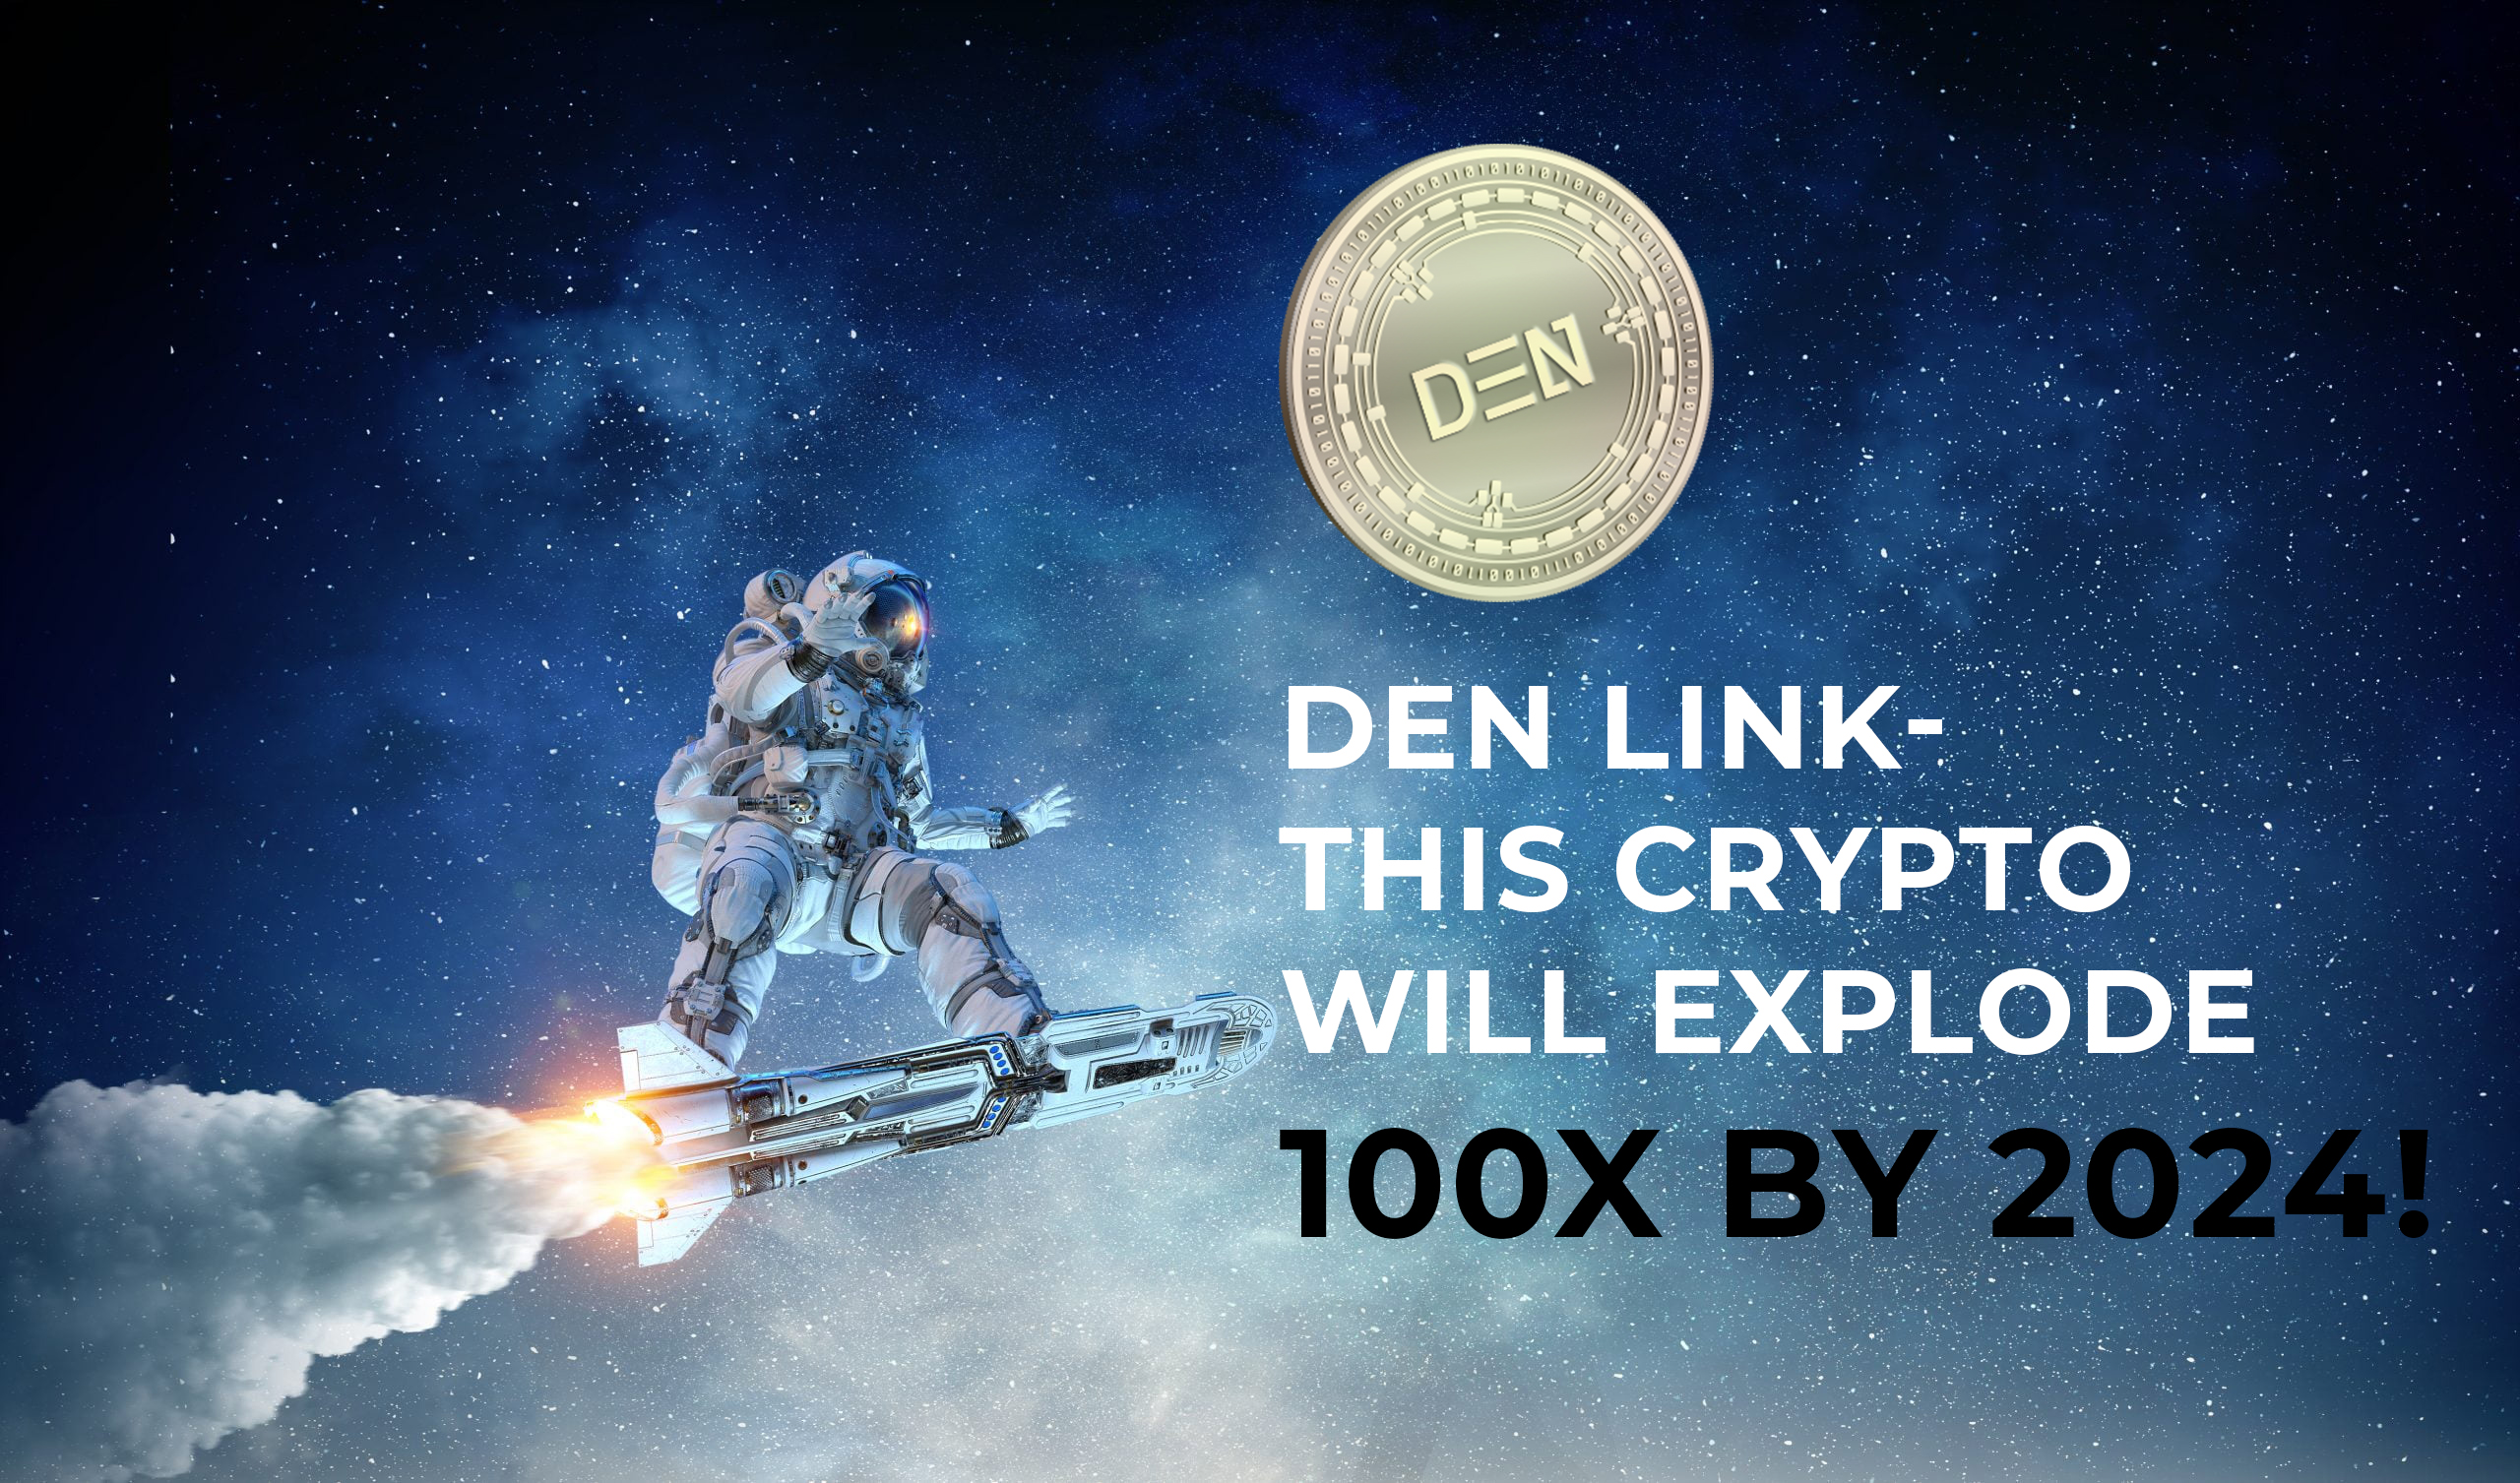 DEN LINK- This Crypto Will Explode 100x By 2024!